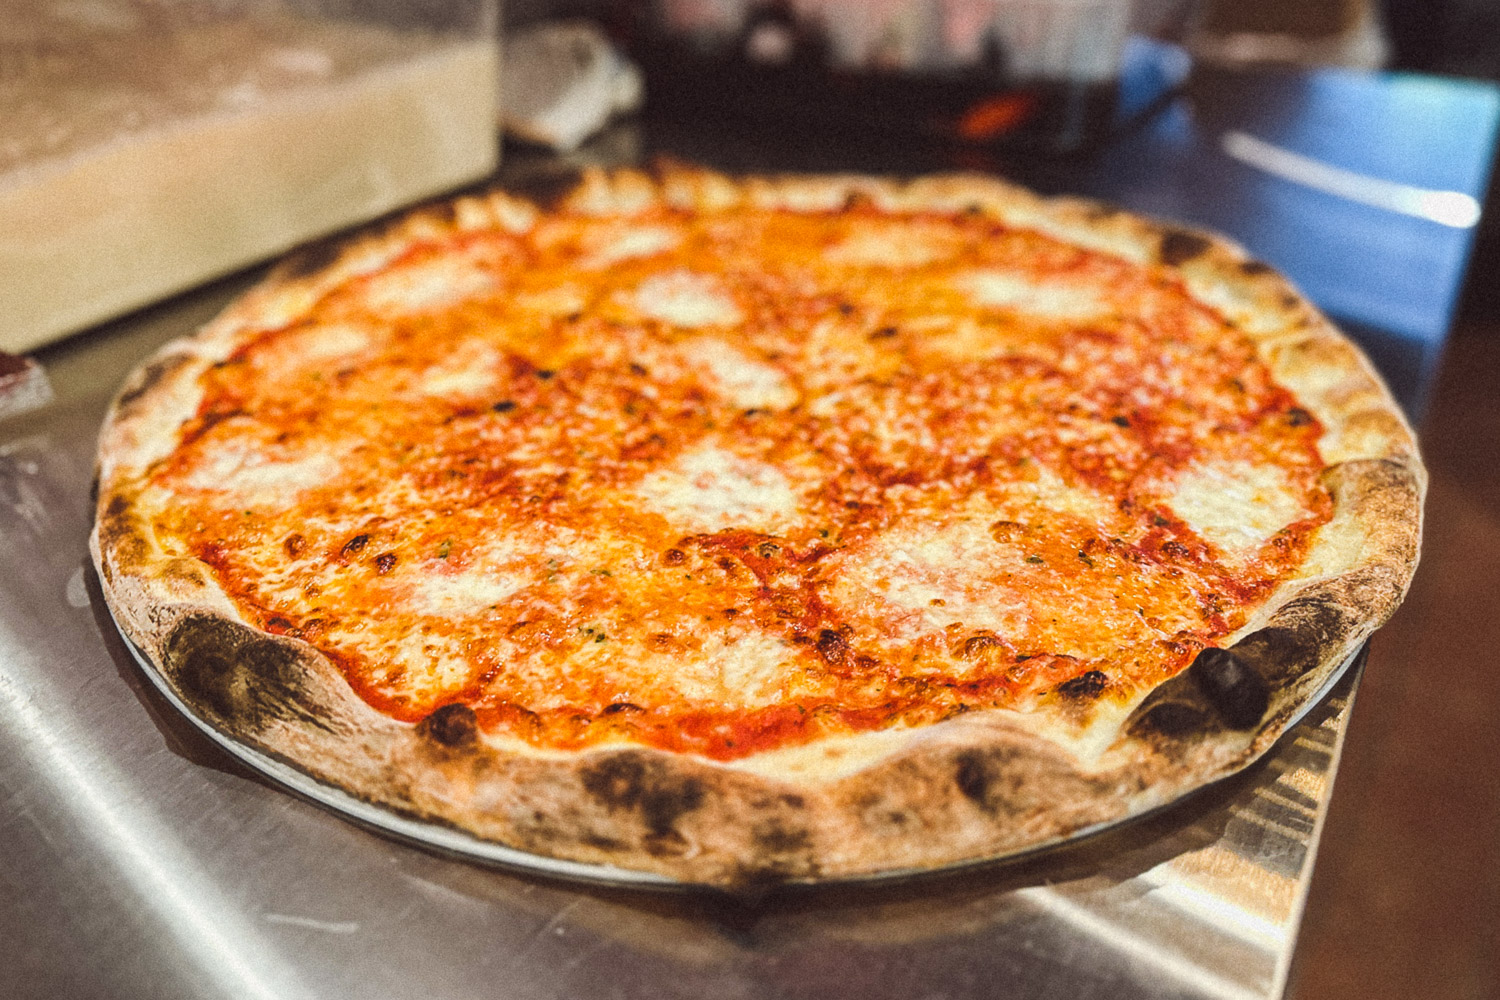 They Sampled 44 NY Slices Before Opening Their New East Bay Pizza Shop